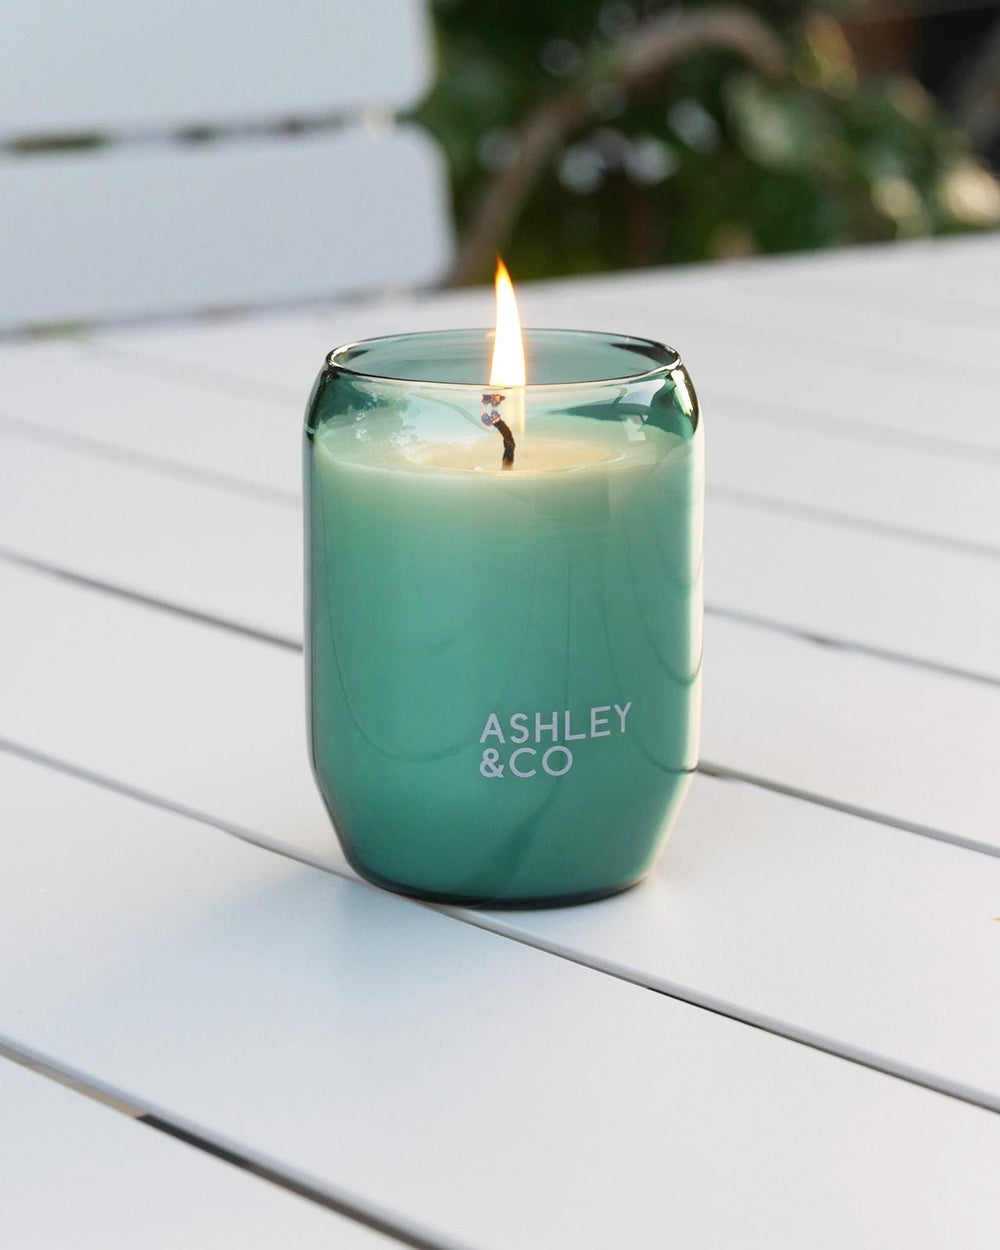 Ashley & Co | Waxed Perfume Citronella Candle - Tui & Kahilli | Shut the Front Door